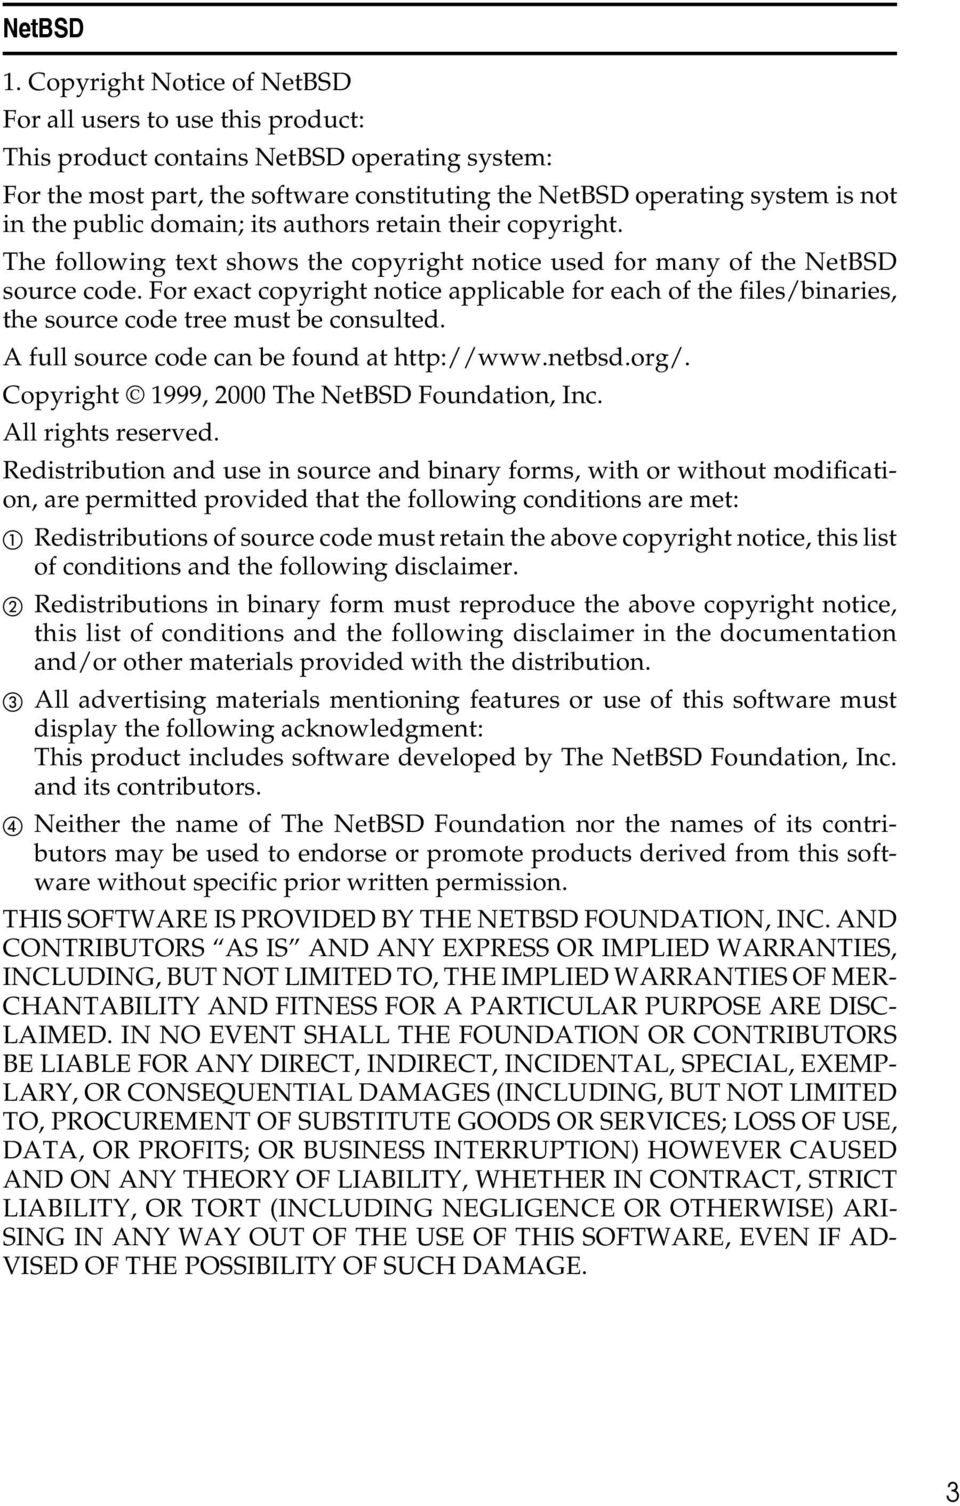 public domain; its authors retain their copyright. The following text shows the copyright notice used for many of the NetBSD source code.